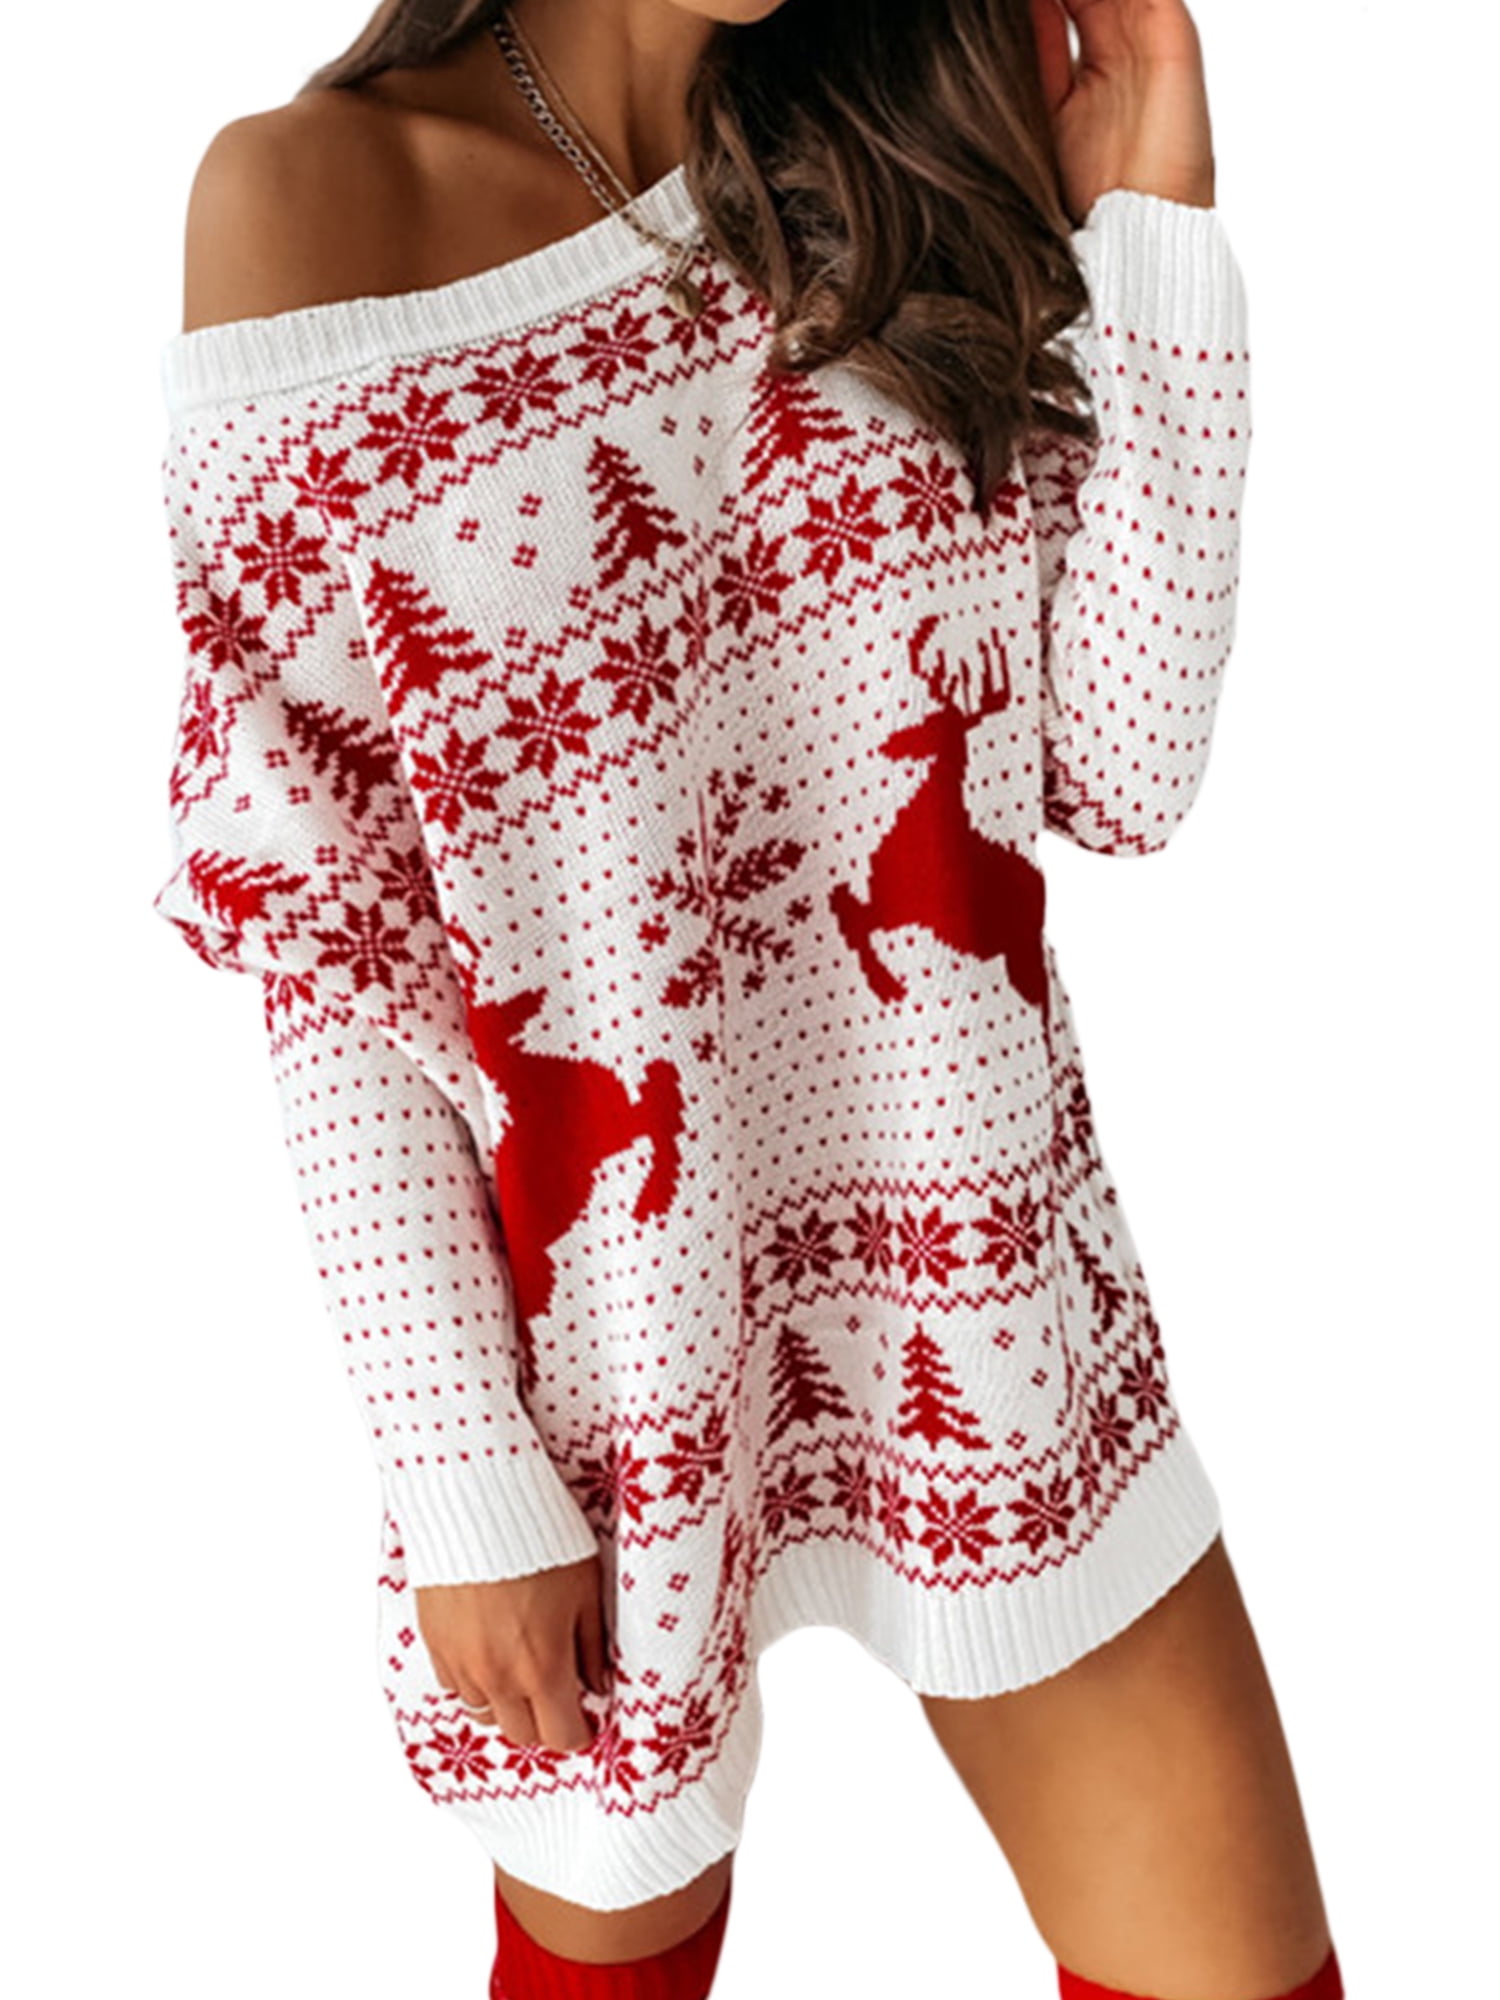 YSJZBS Christmas Sweaters For Women,cyber of monday clothing,top  deals,womens capris for summer clearance,overnight delivery dress,2 dollar  items only